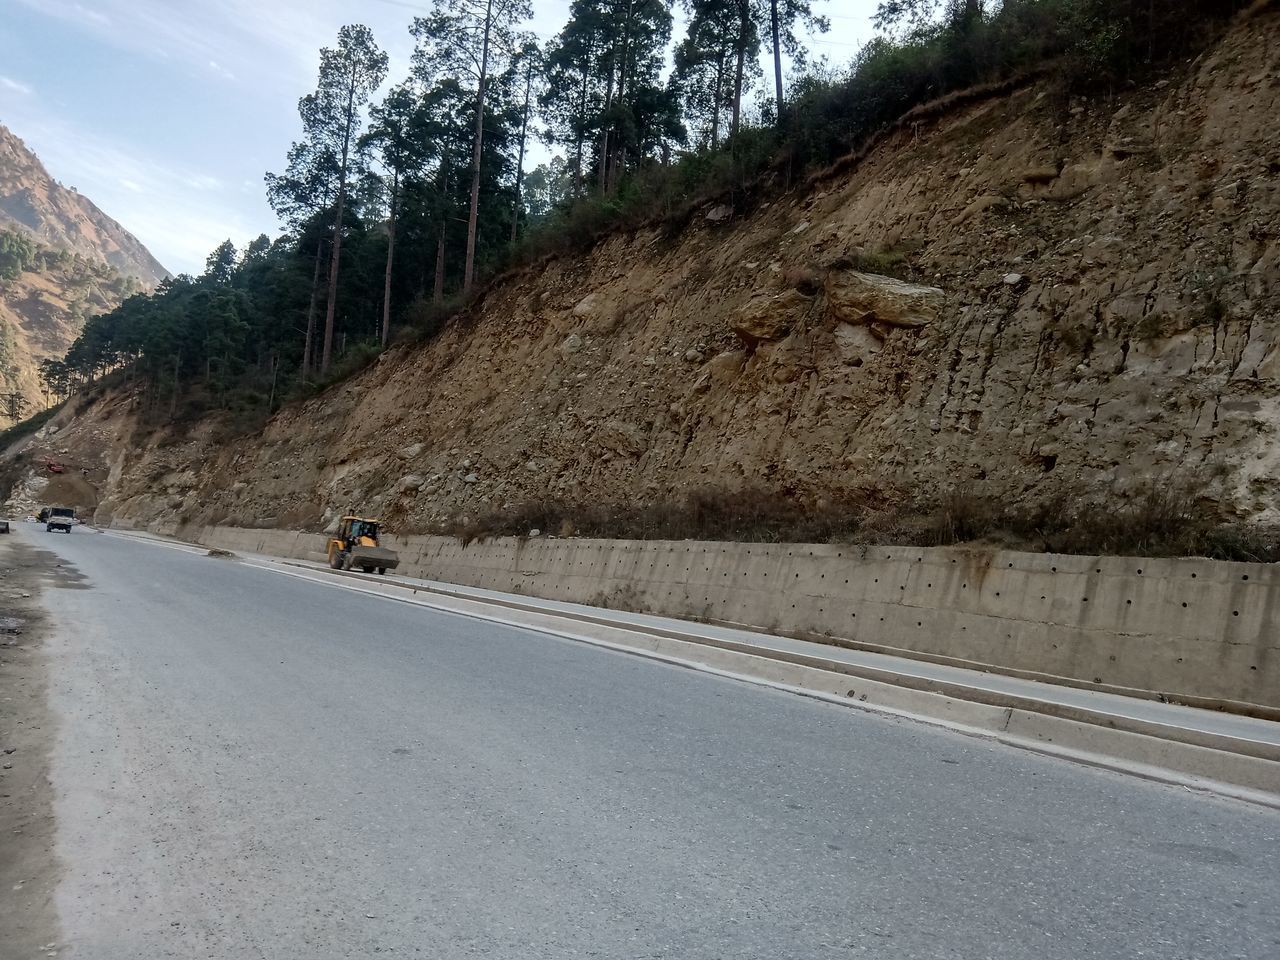 VIEW OF ROAD BY MOUNTAIN